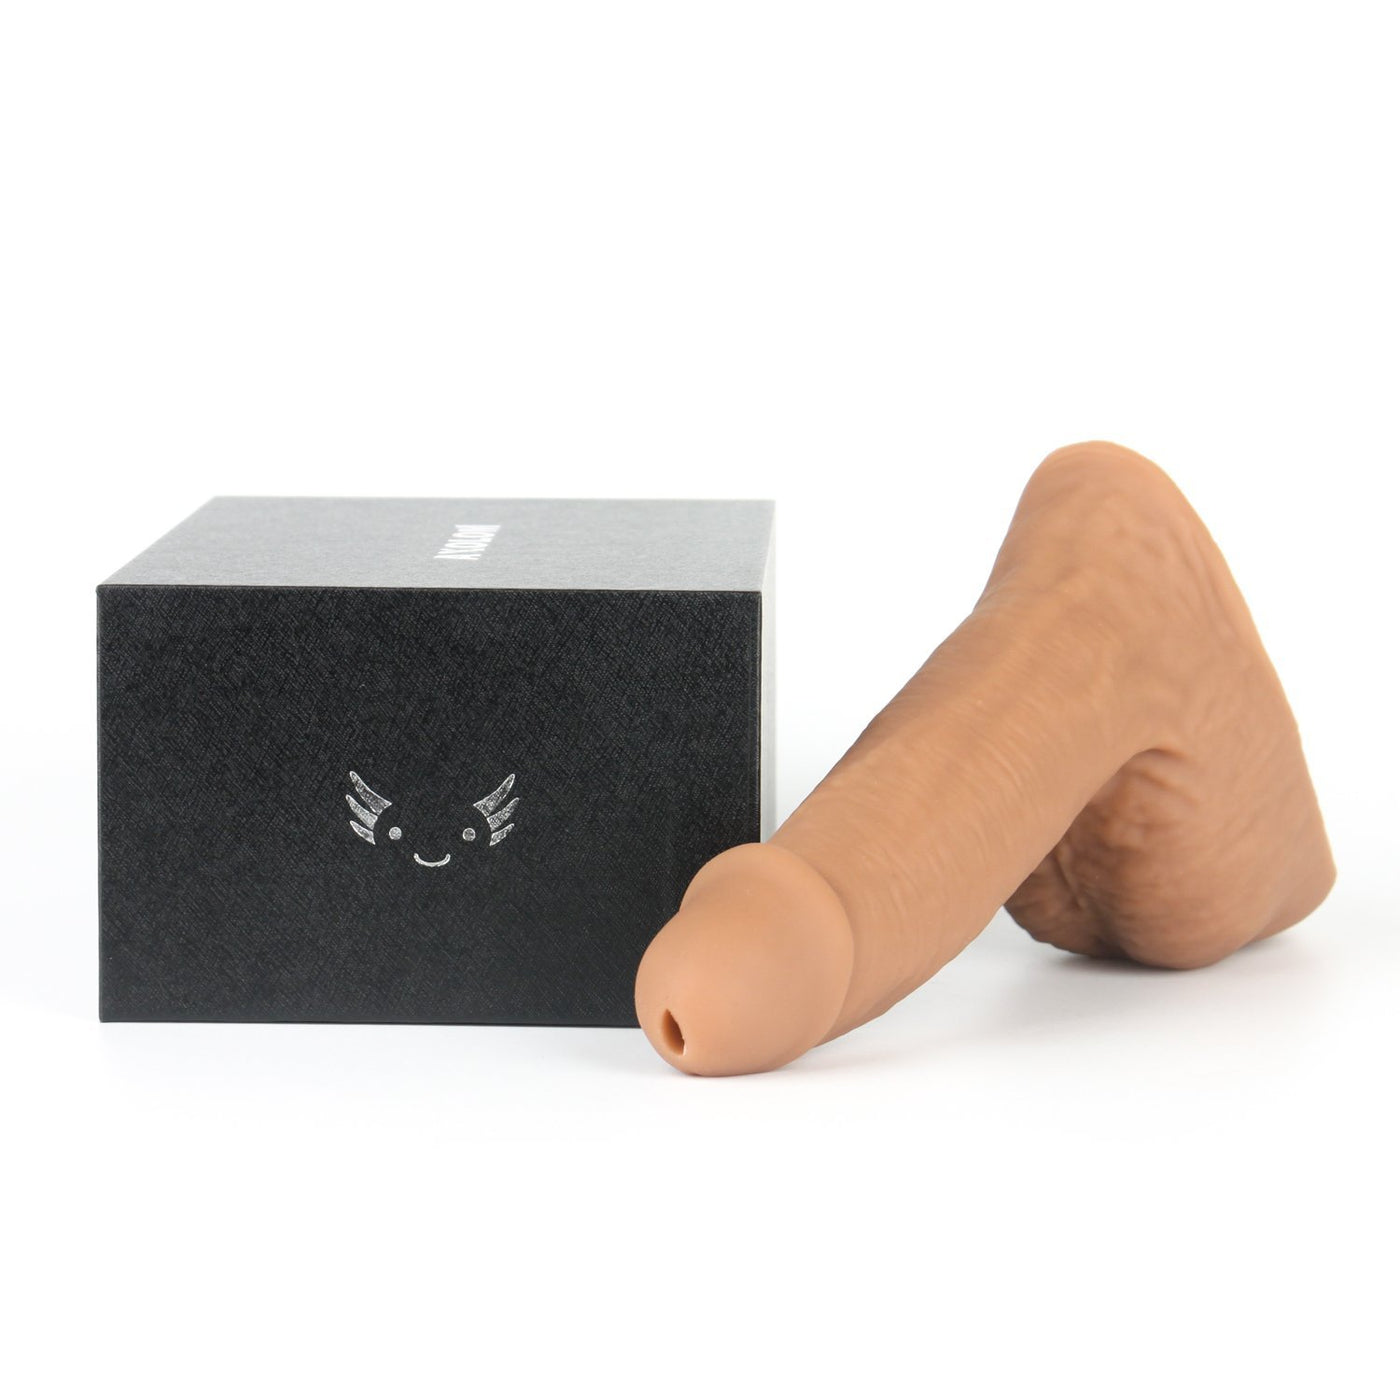 AXOLOM The Knight 3-IN-1 STP Packer with Pleasure Edges - Axolom